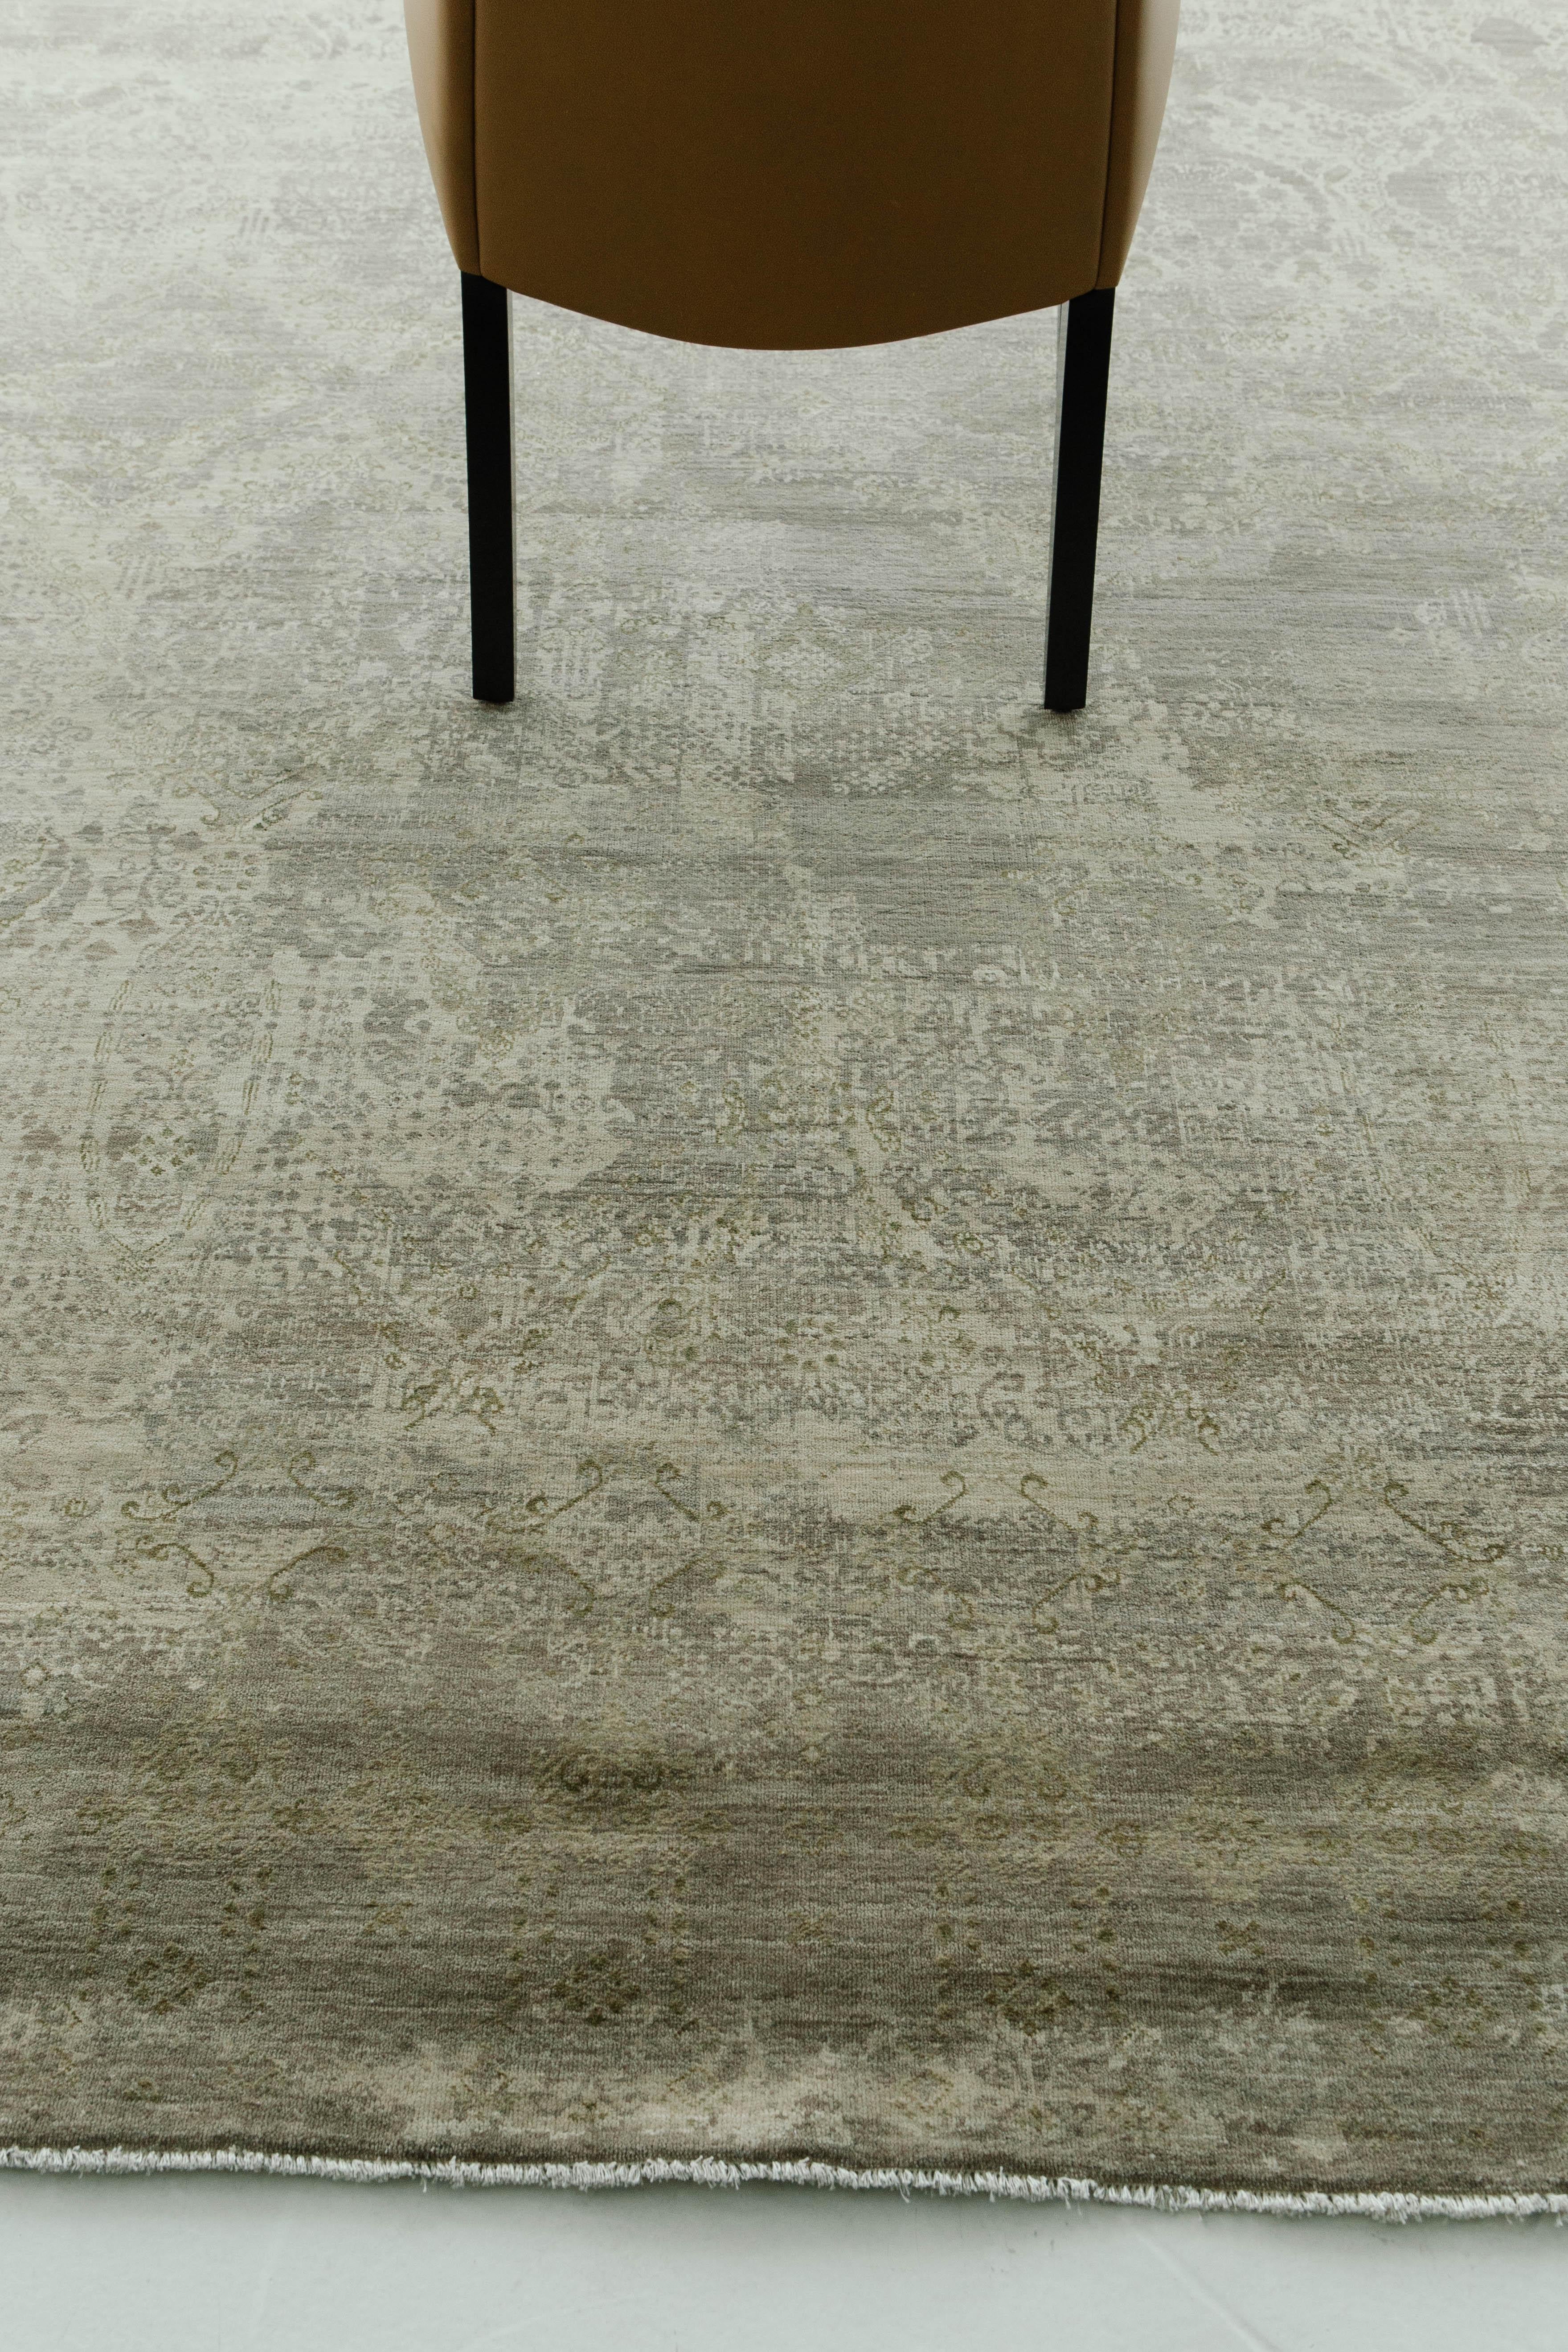 Transitional Design Rug Allure Fiore In New Condition For Sale In WEST HOLLYWOOD, CA